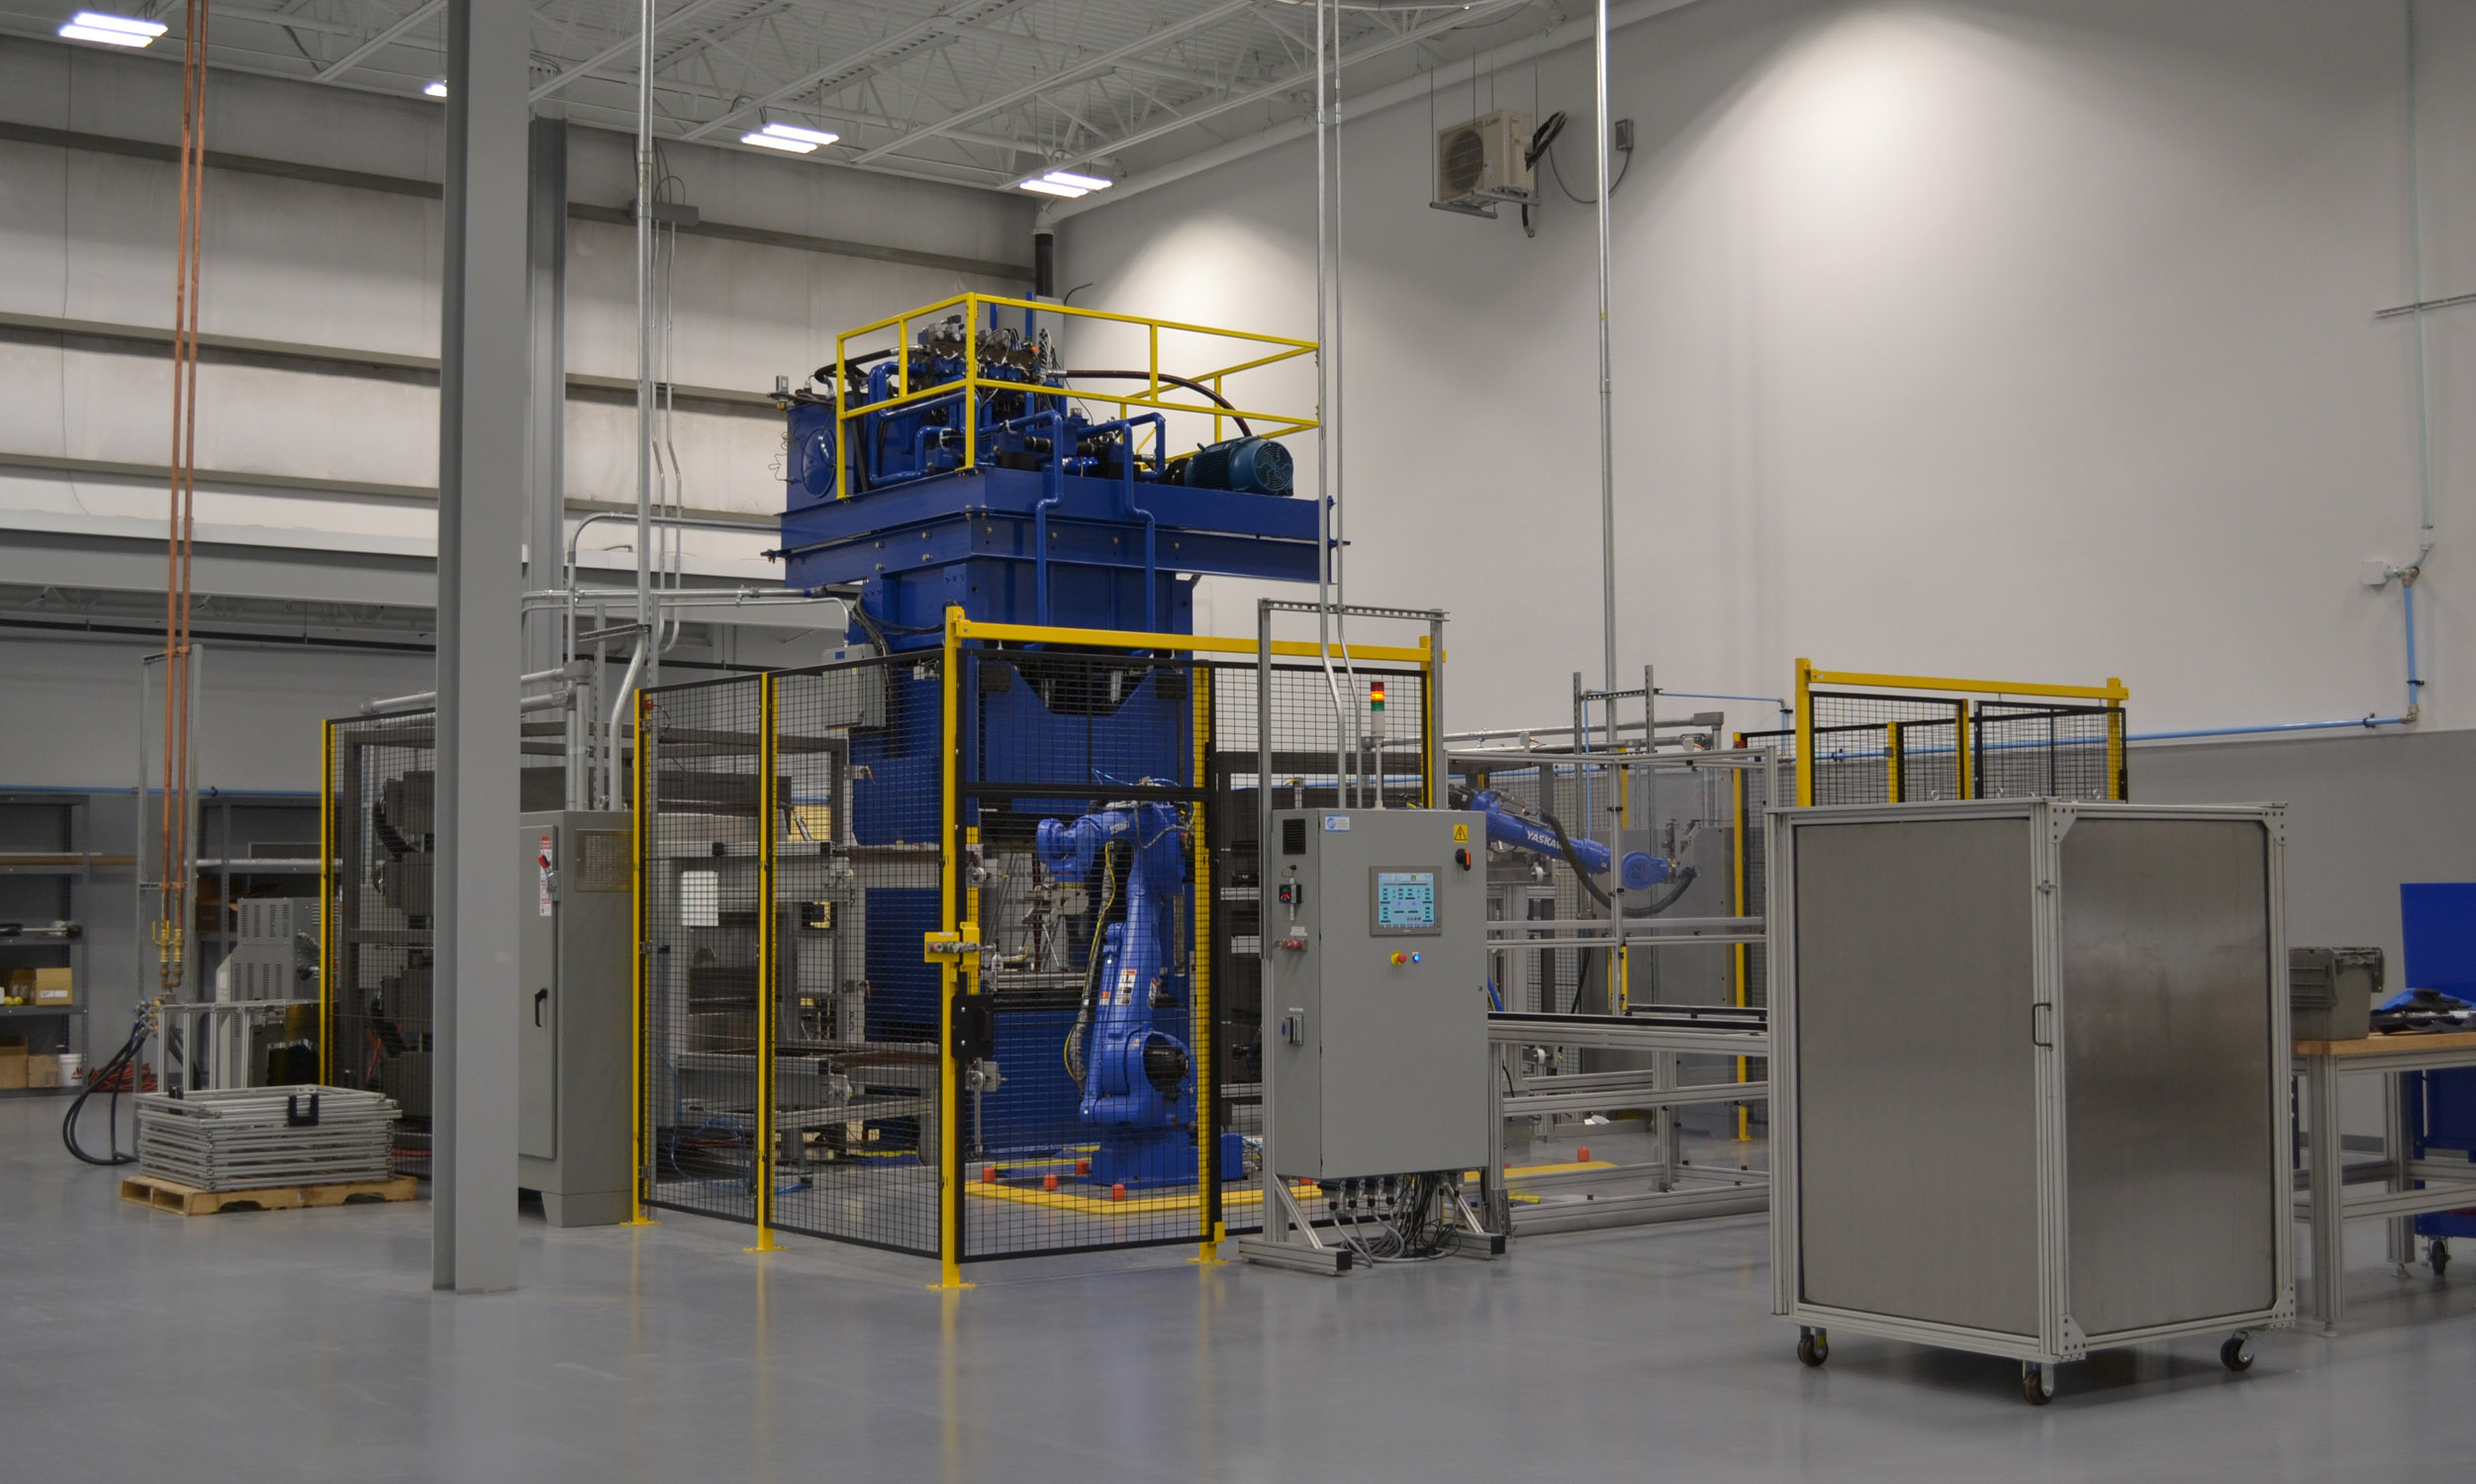 TxV’s manufacturing facility was designed and built to form polyketone composite parts for commercial aerospace.